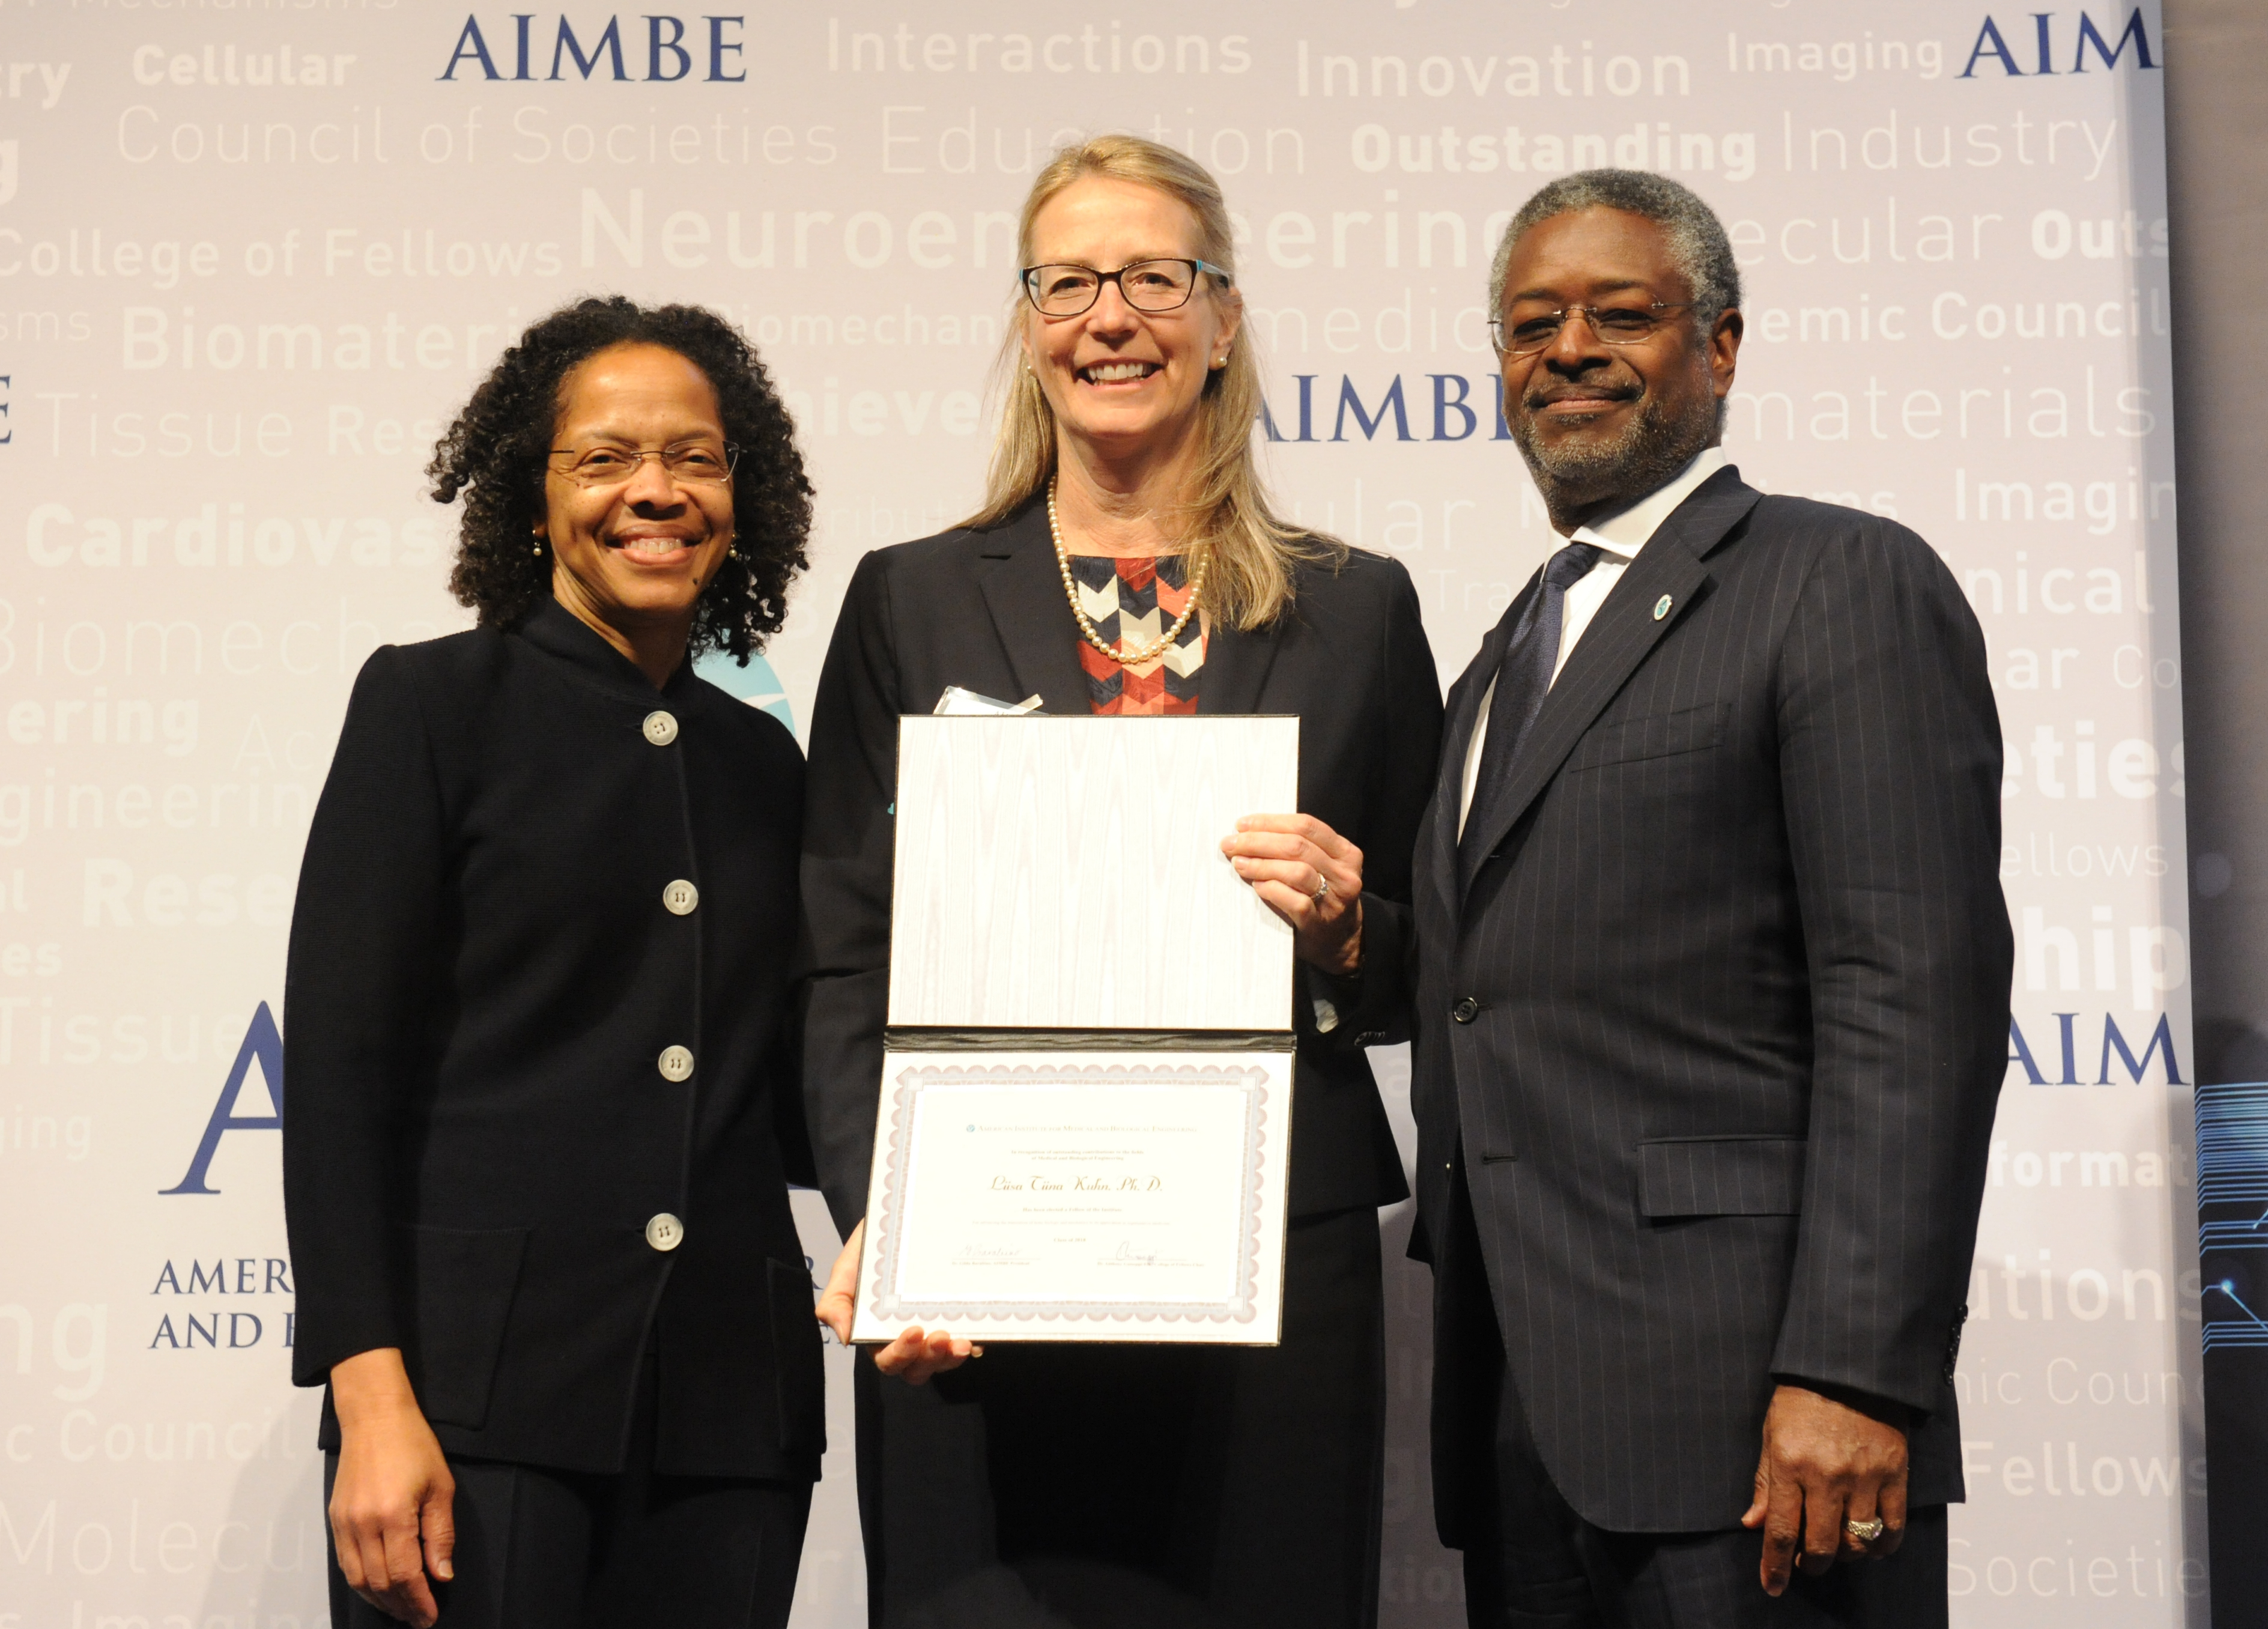 Liisa Kuhn, center, is inducted into the AIMBE Fellows National Academy of Sciences. She is joined by AIMBE President Gilda Barabino (left) and AIMBE Chair Anthony Guiseppi-Elie (right). (AIMBE Fellows Photo)